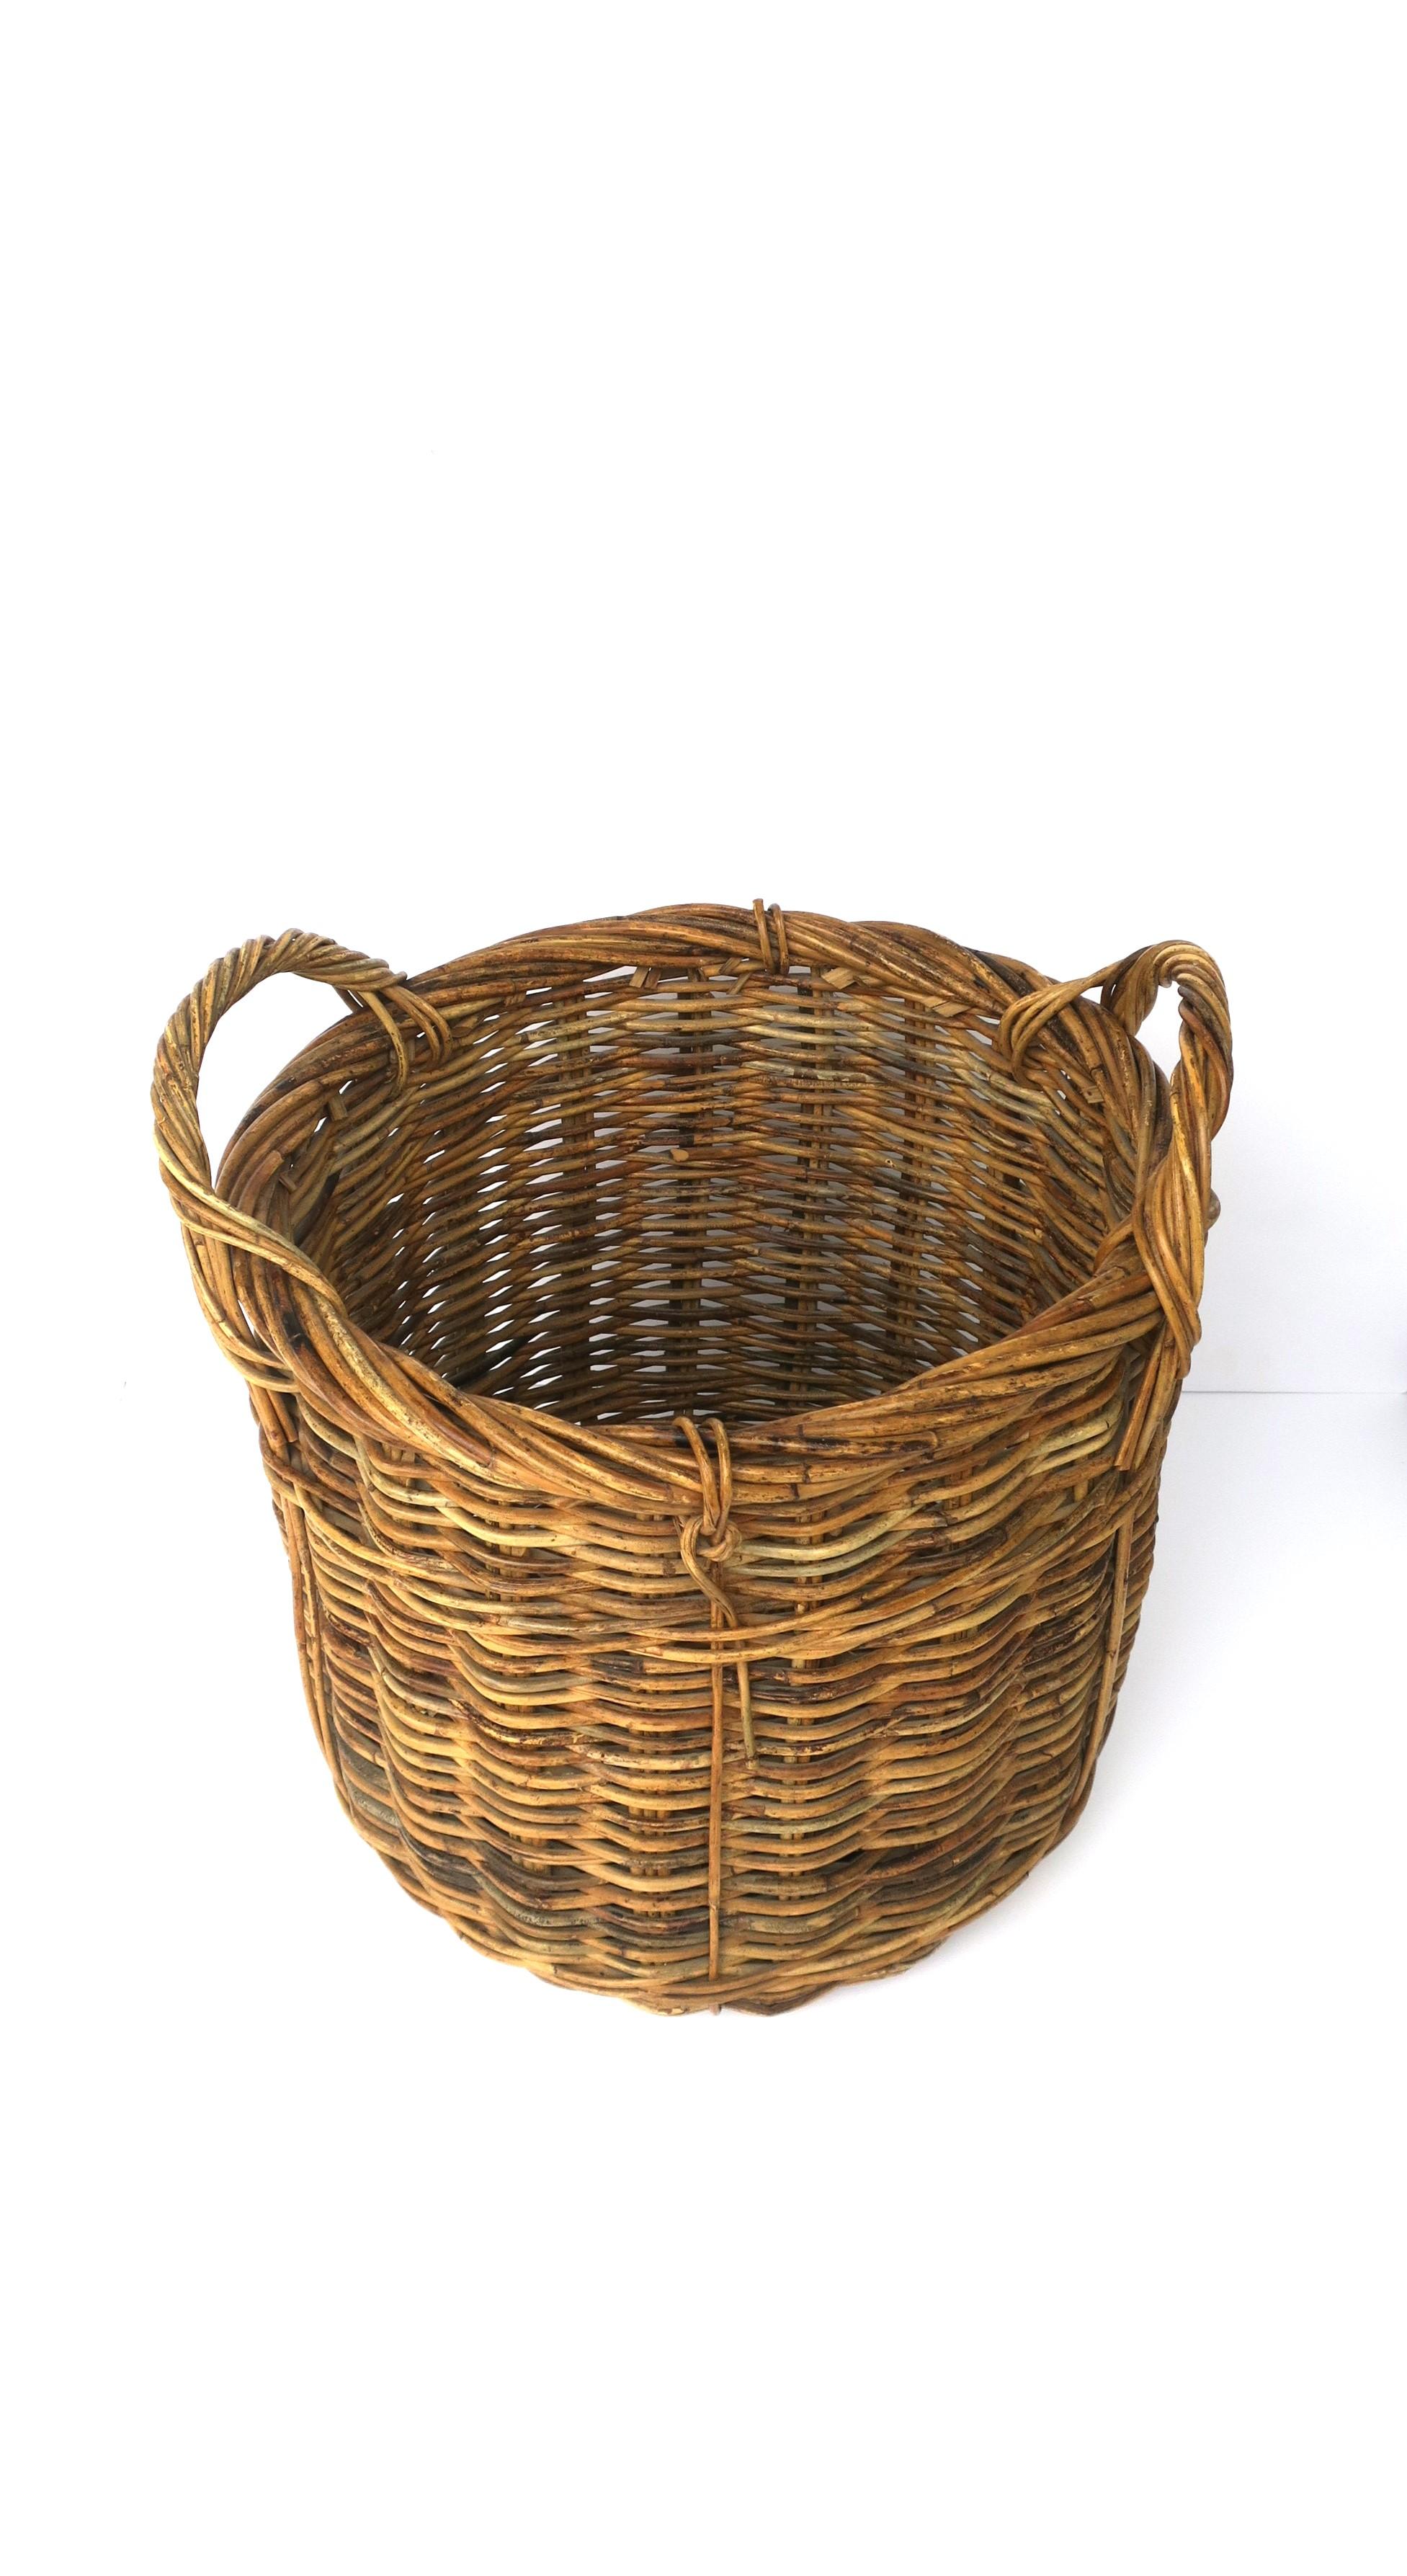 Wicker Basket Plant Potholder Cachepot or Storage In Good Condition For Sale In New York, NY